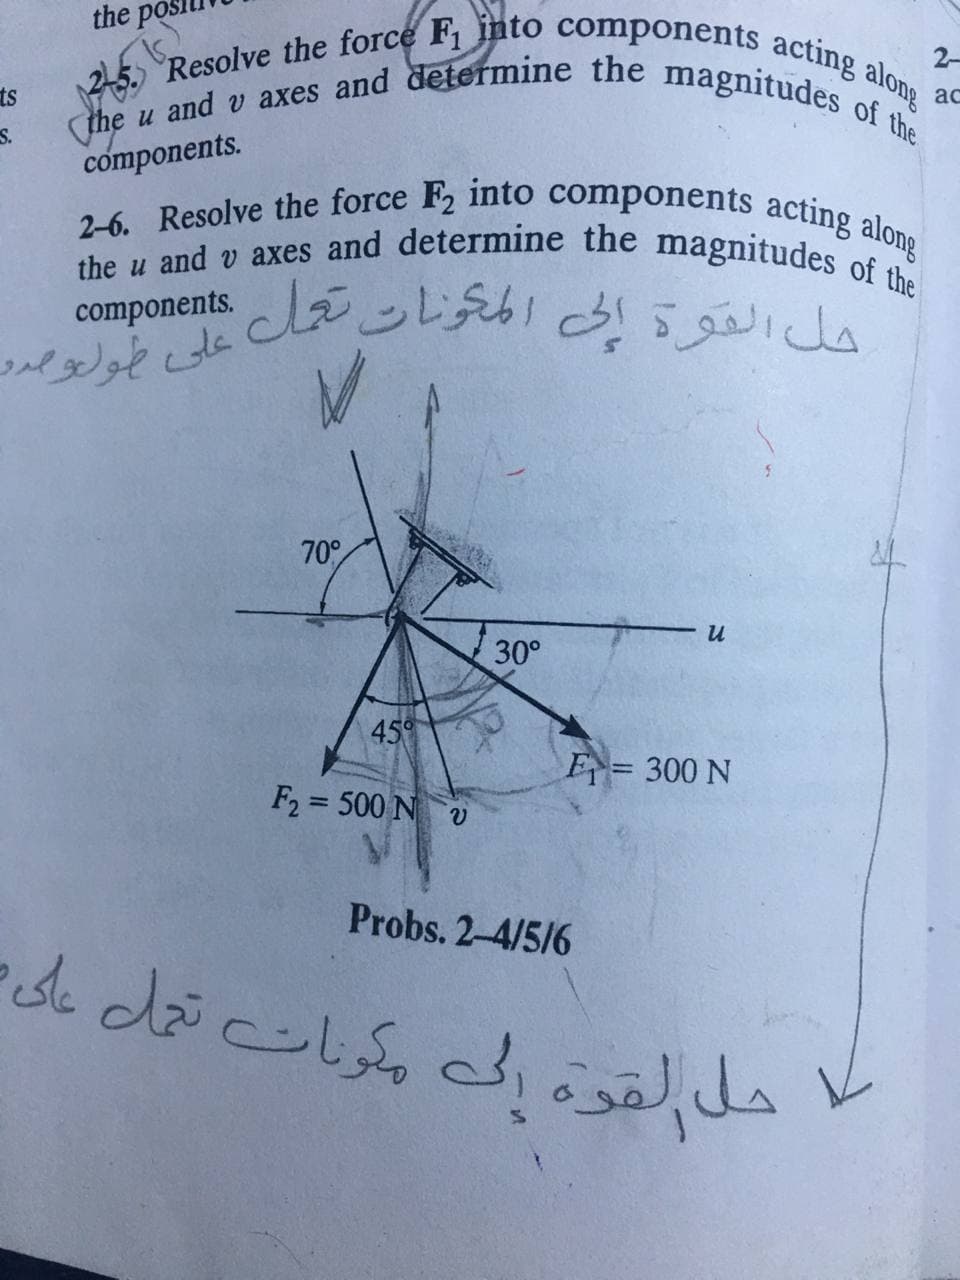 2-6. Resolve the force F, into components acting along
Resolve the force F, into components acting along
the u and v axes and determine the magnitudes of the
the pos
2-
ts
ac
S.
components.
she u and v axes and determine the magnitudesong
componentsLンレ c31
5.9a
حل القود
70°
30°
45°
F= 300 N
F2 = 500 Nv
Probs. 2-4/5/6
